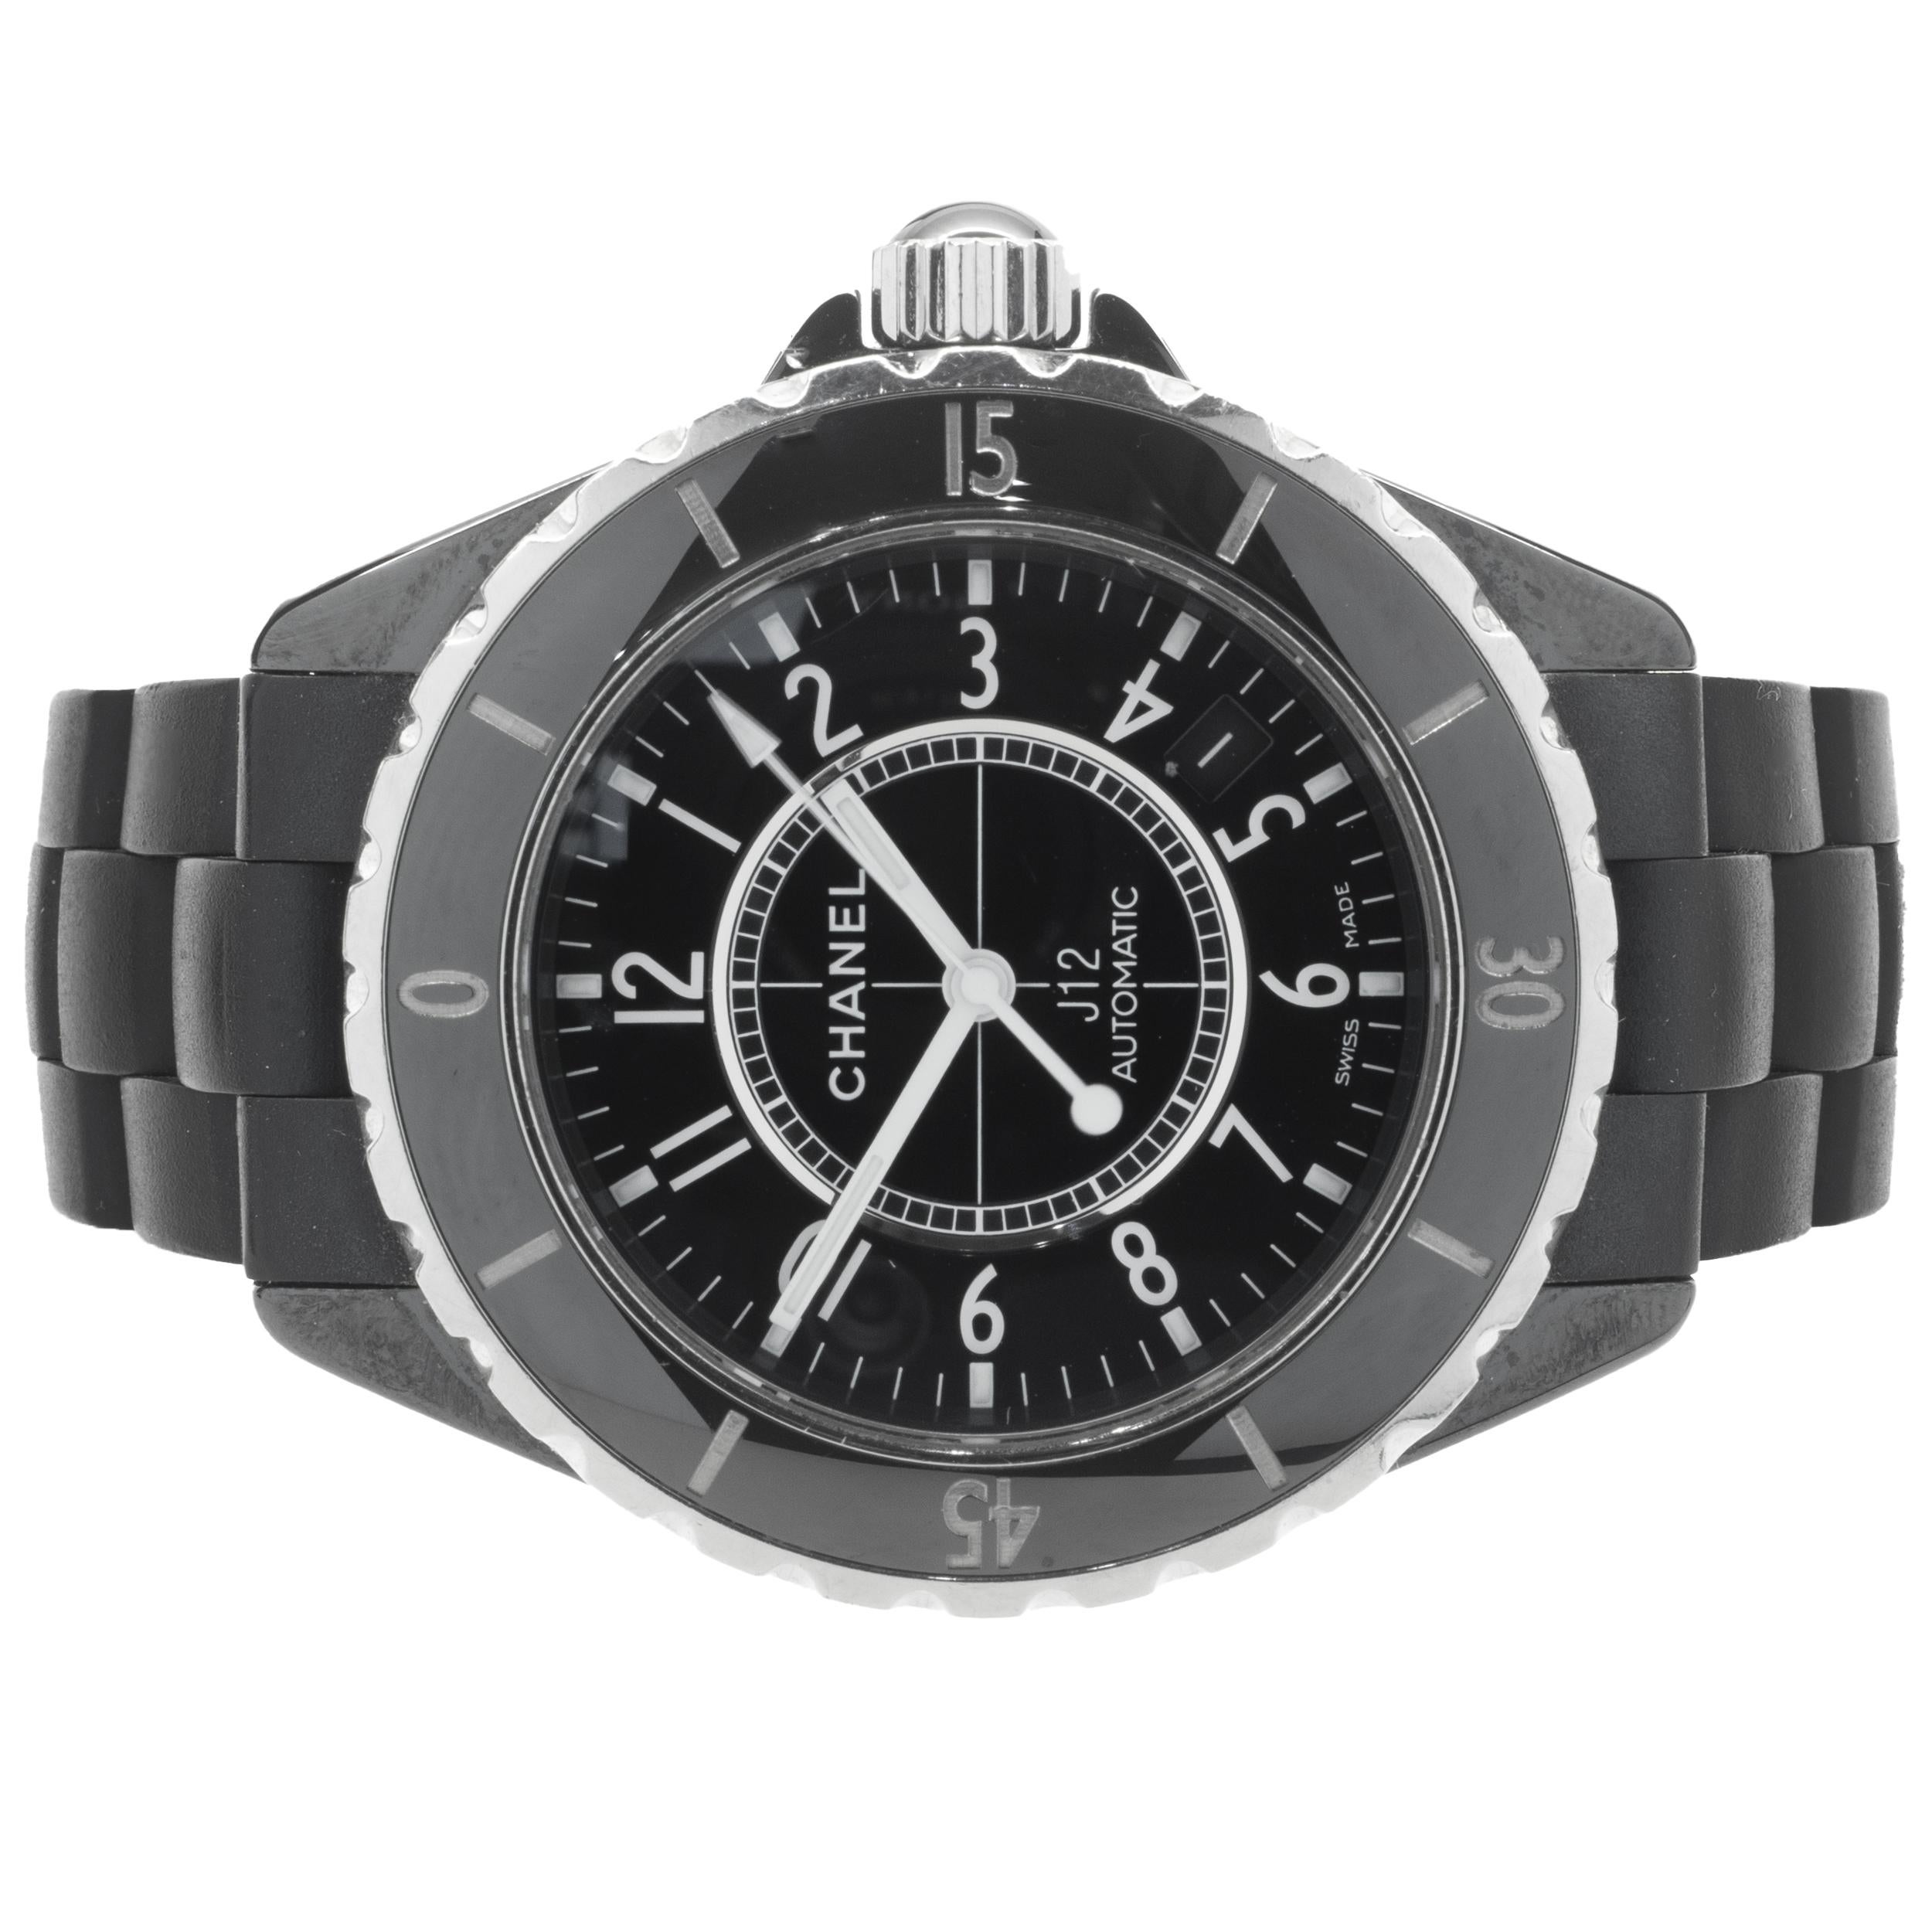 Movement: quartz
Function: hours, minutes, seconds, date 
Case: 38mm black ceramic case, uni-directional rotating bezel, sapphire crystal, water resistant to 200 meters
Band: black rubber bracelet
Dial: black arabic dial
Reference #: J12 
Serial #: